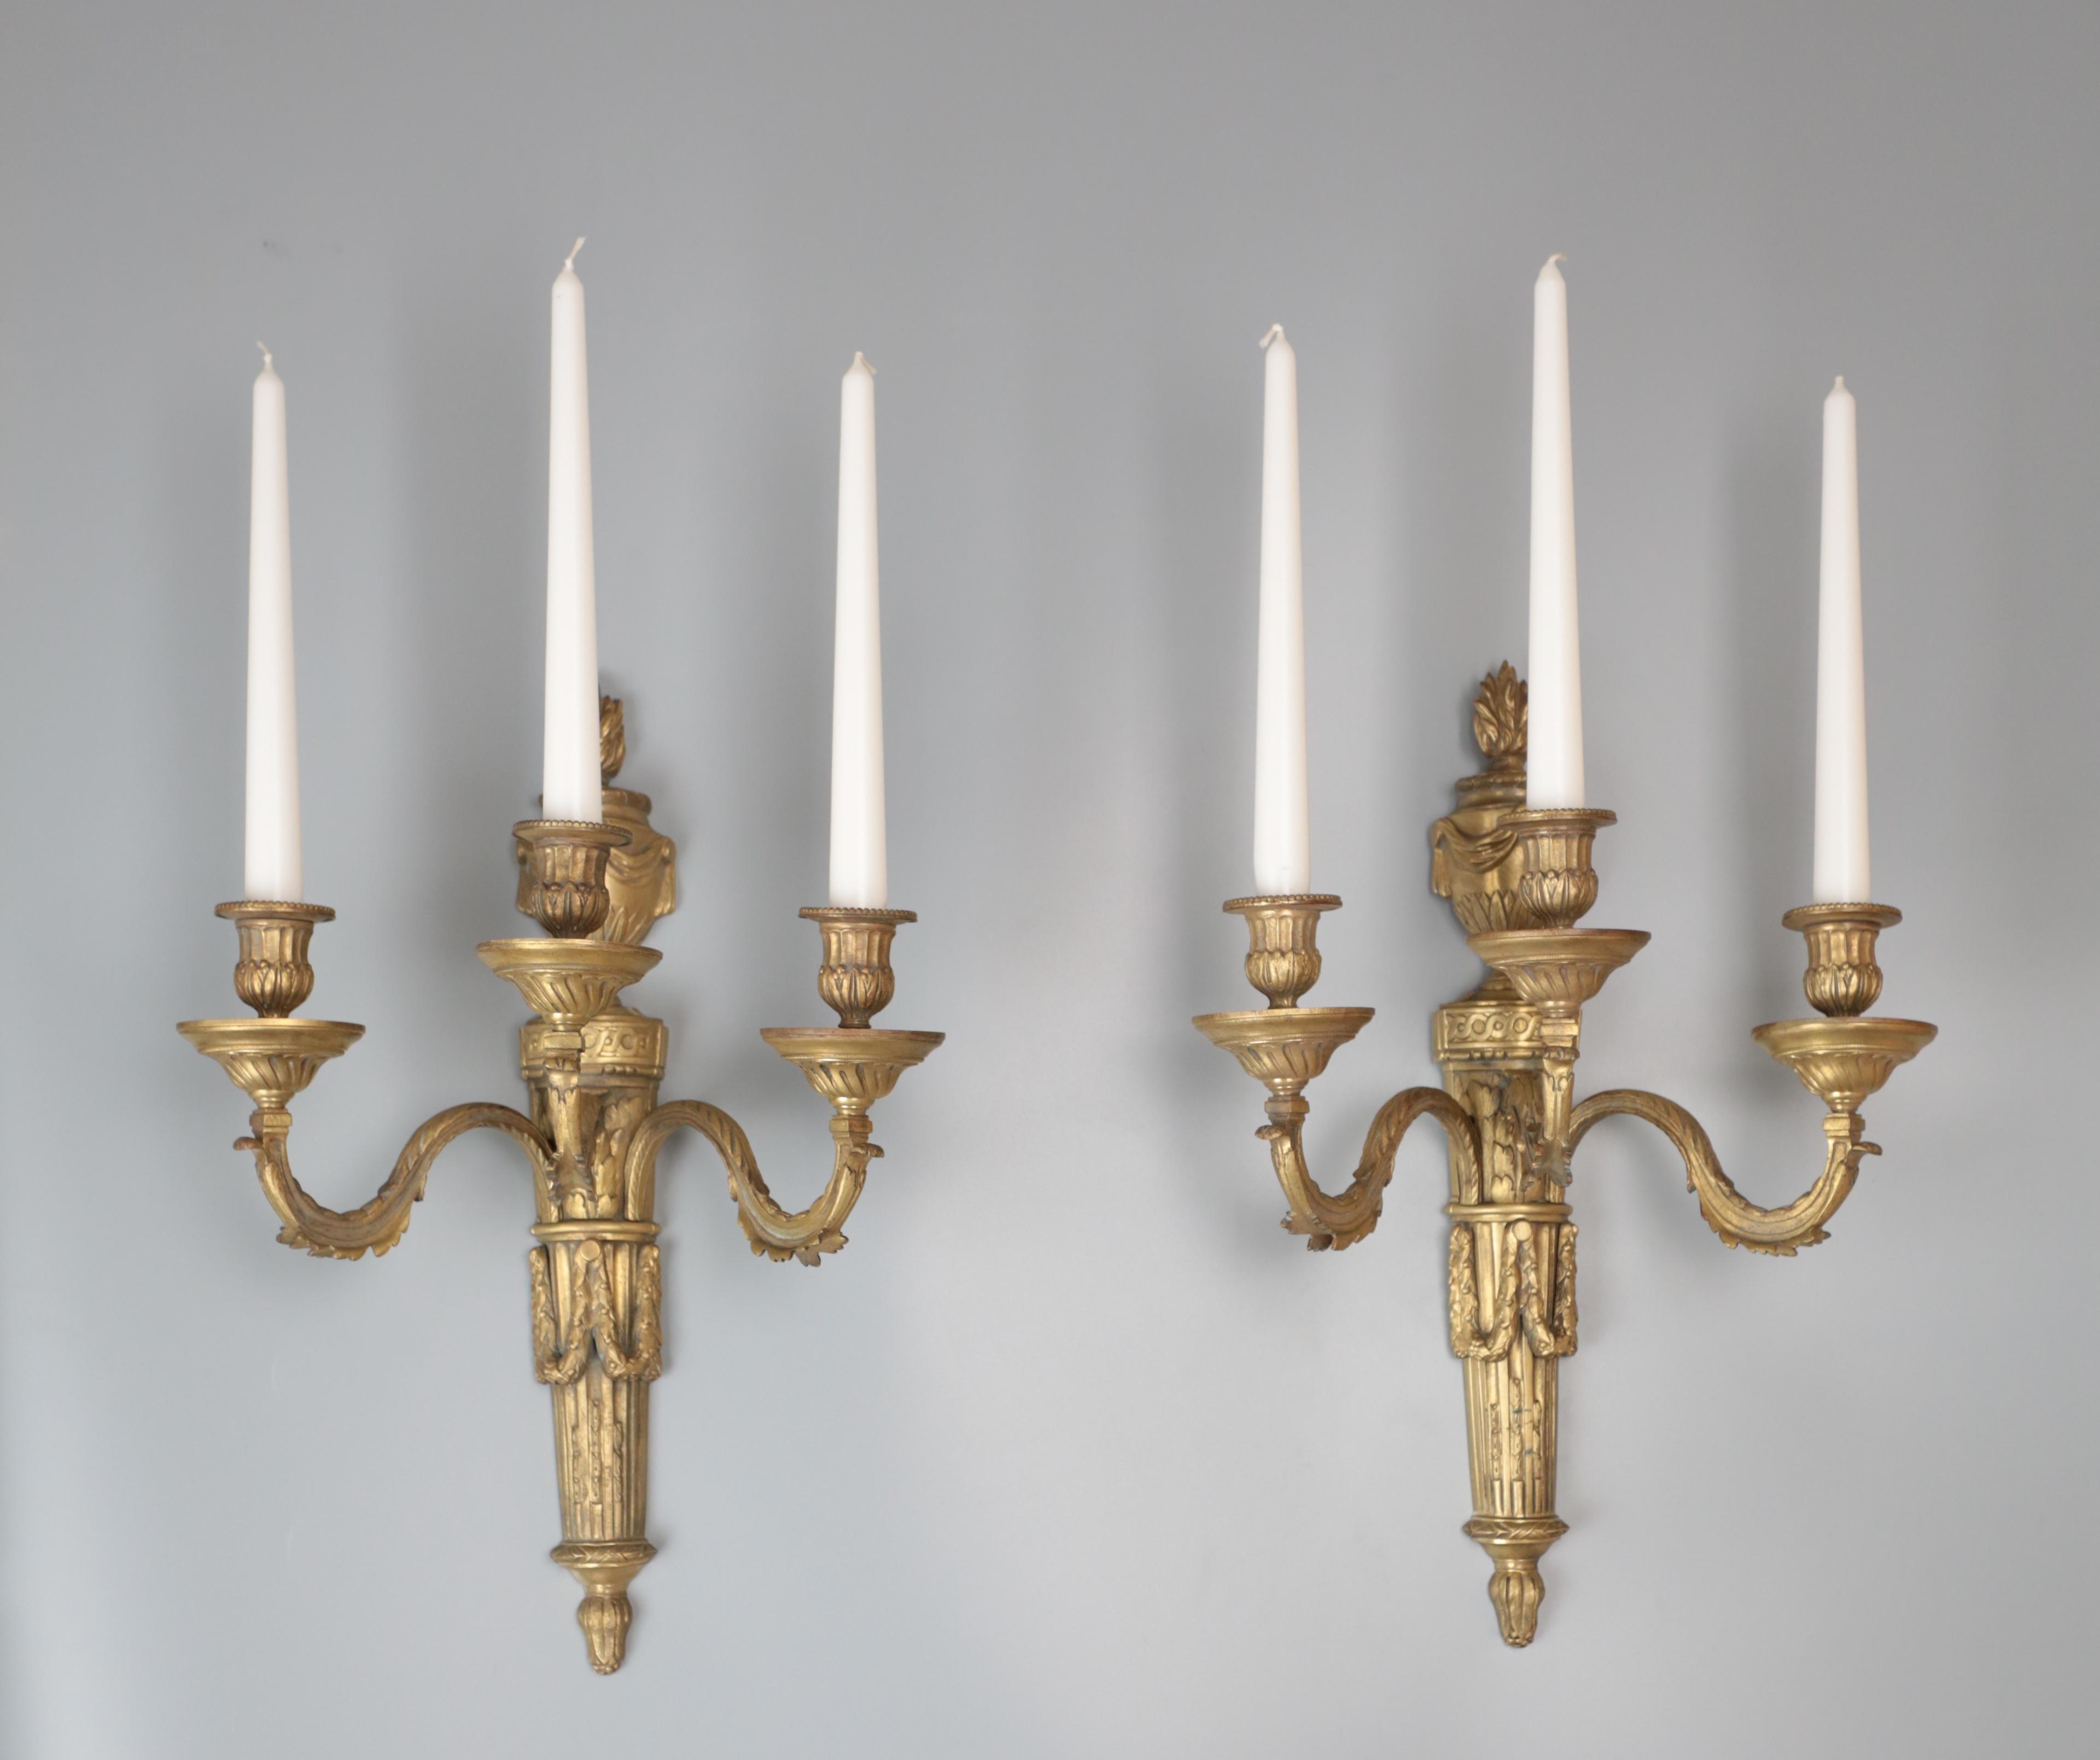 French gilded bronze wall lamps in the Adams style. Excellent quality of craftsmanship and material used. A typical classicist rendering with laurel leaves and a triumphal vase at the top. Lamps are very heavy. Date: around 1880. Provenance: France.